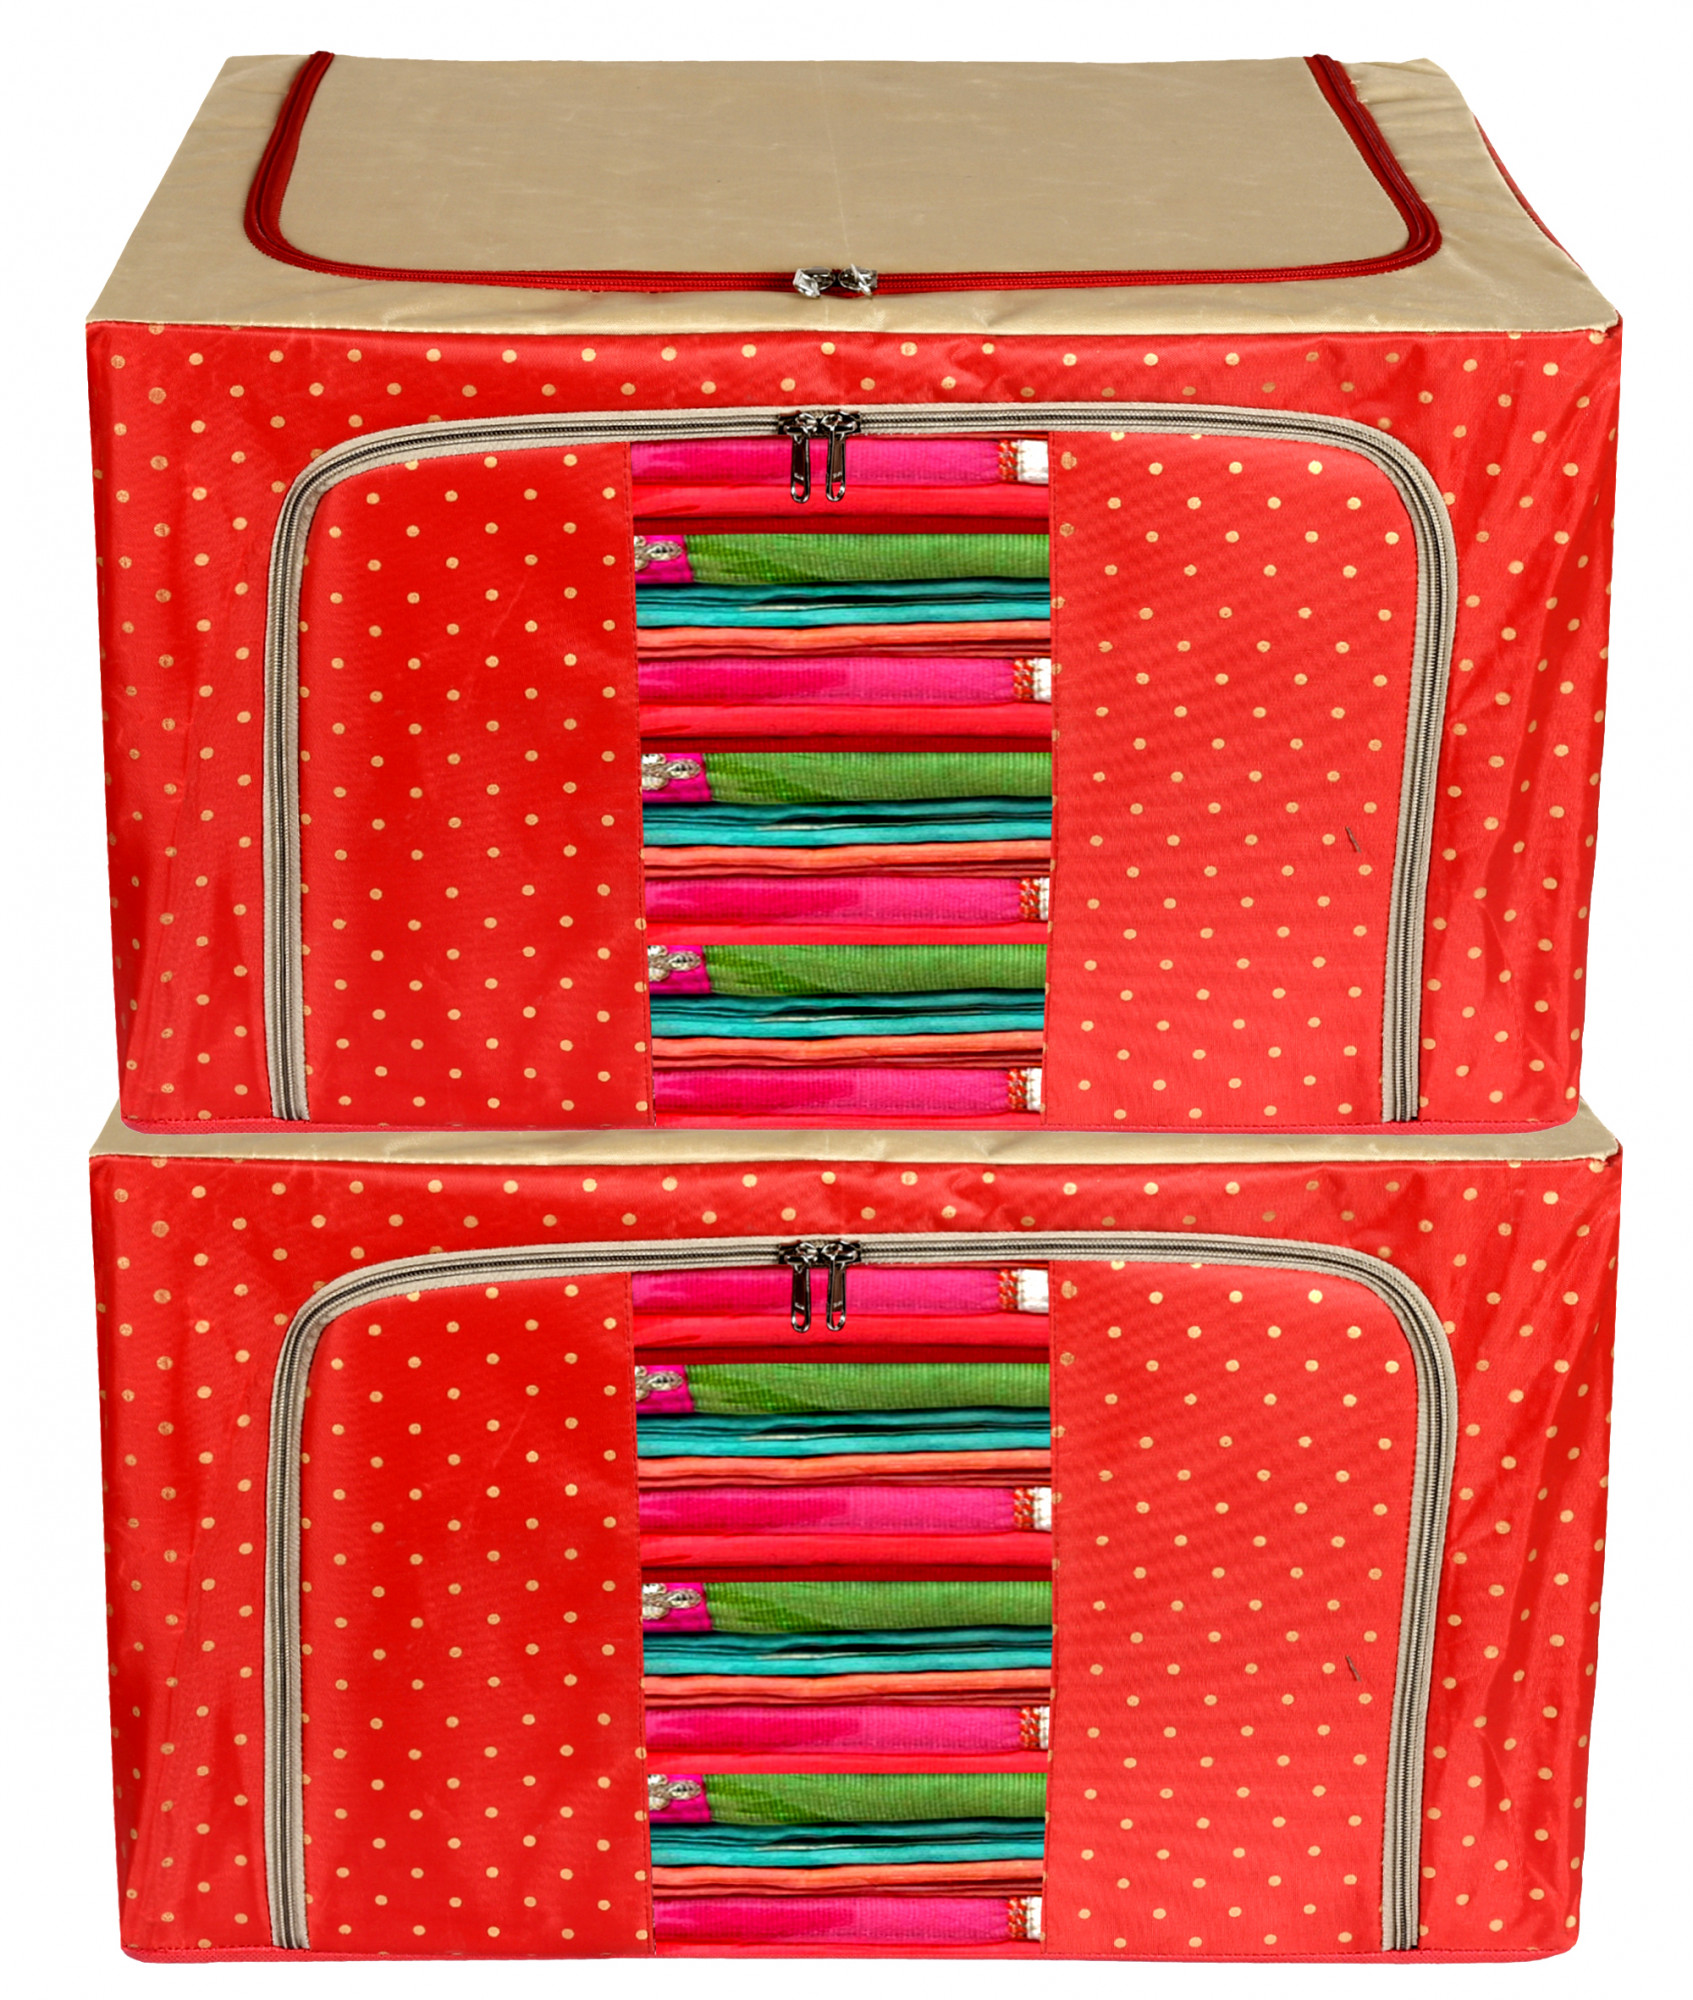 Kuber Industries Dot Printed Steel Frame Storage Box/Organizer For Clothing, Blankets, Bedding With Clear Window, 88Ltr. (Red & Brown)-44KM0261